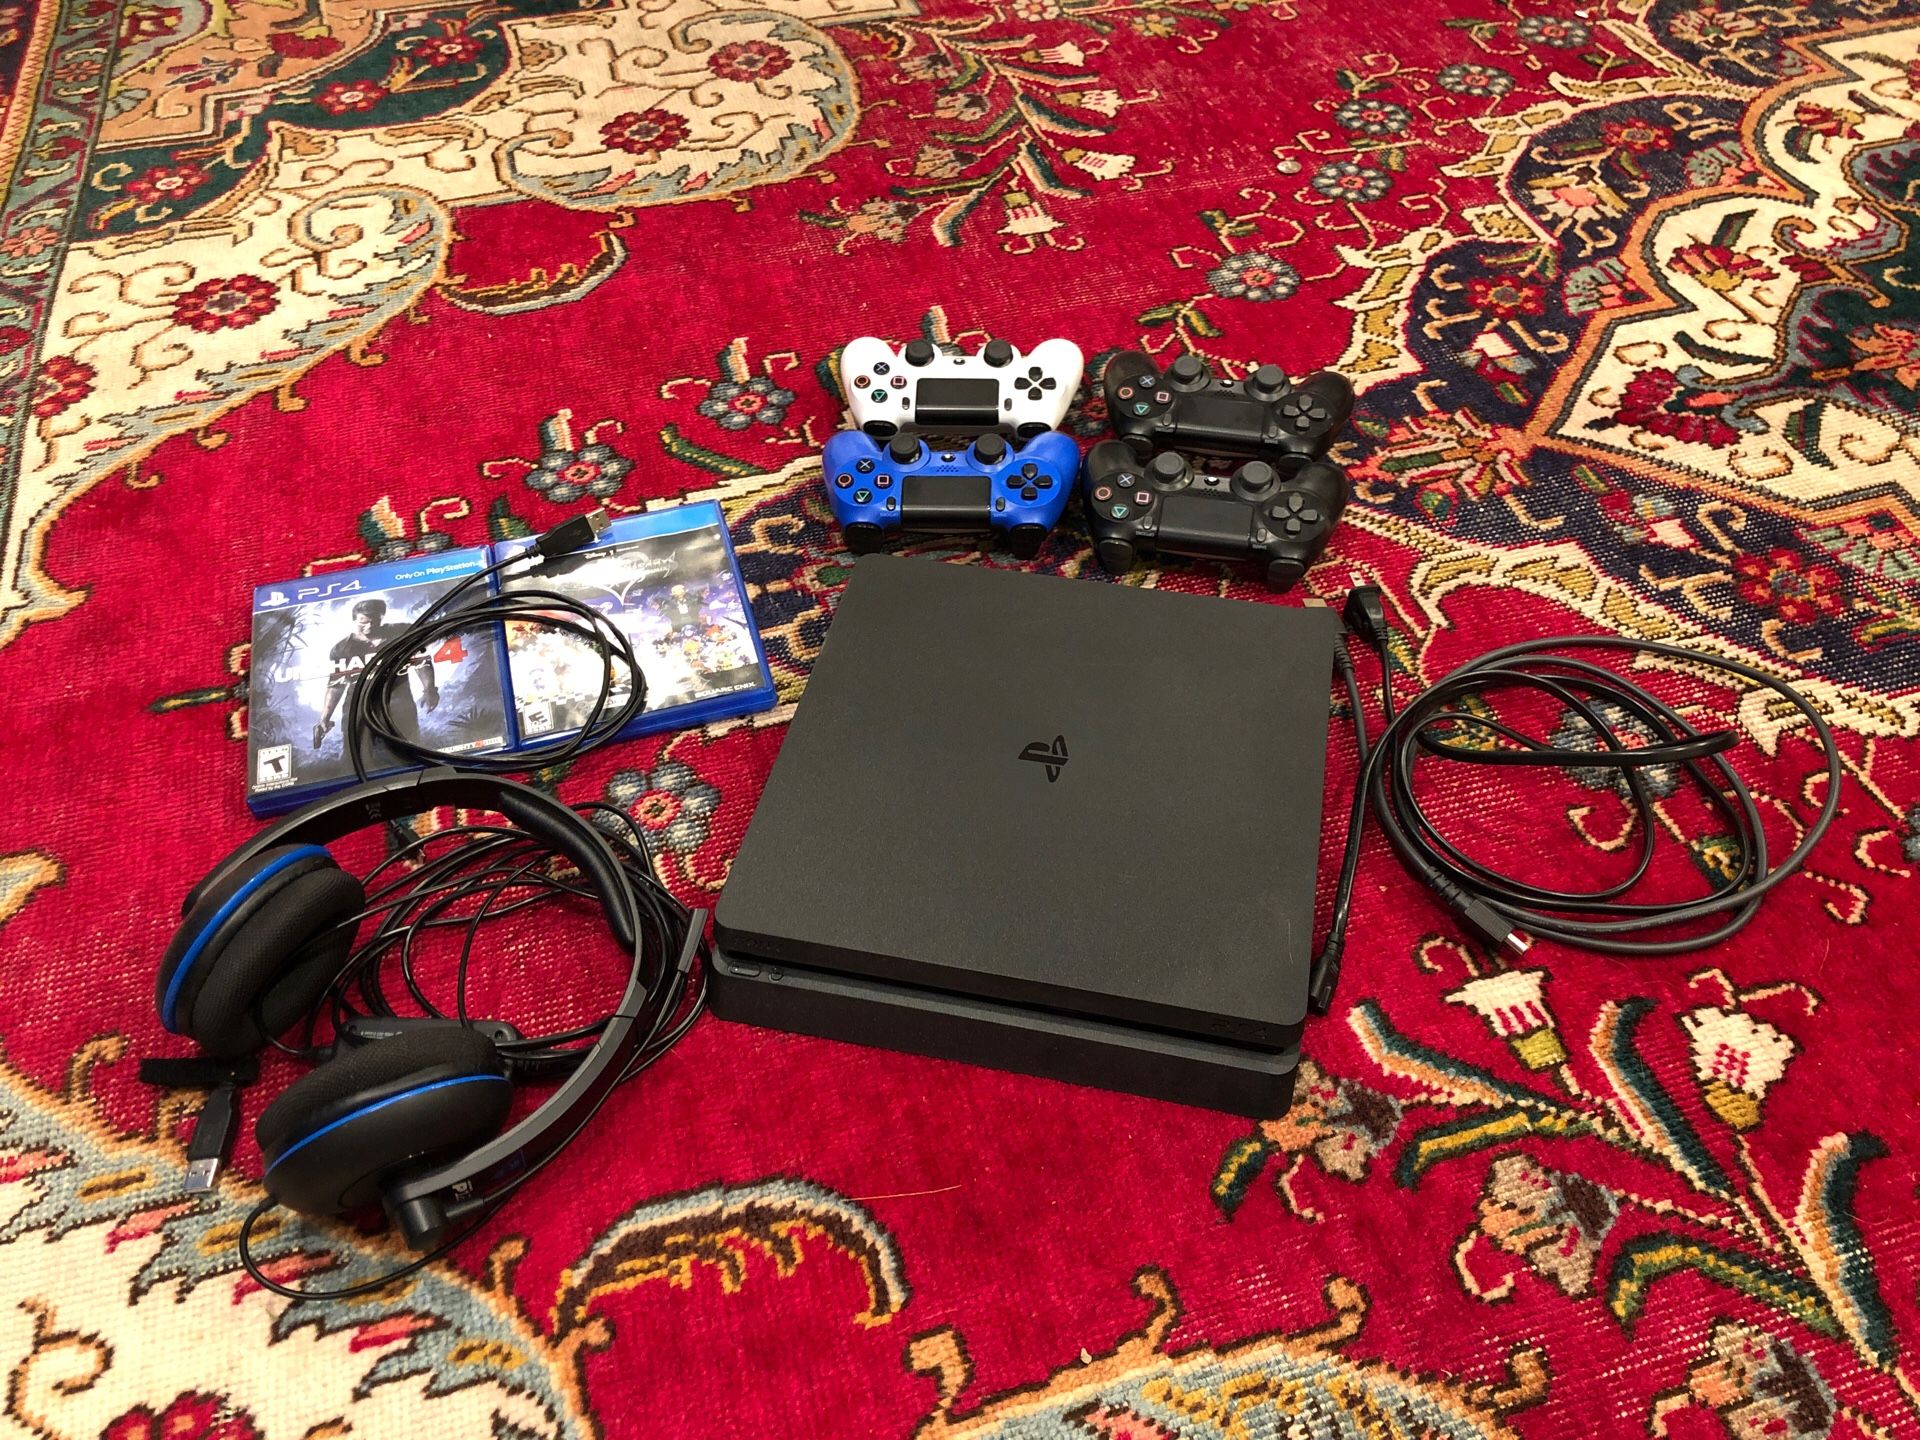 PS4 Slim with 4 controllers, wired headset, and two games